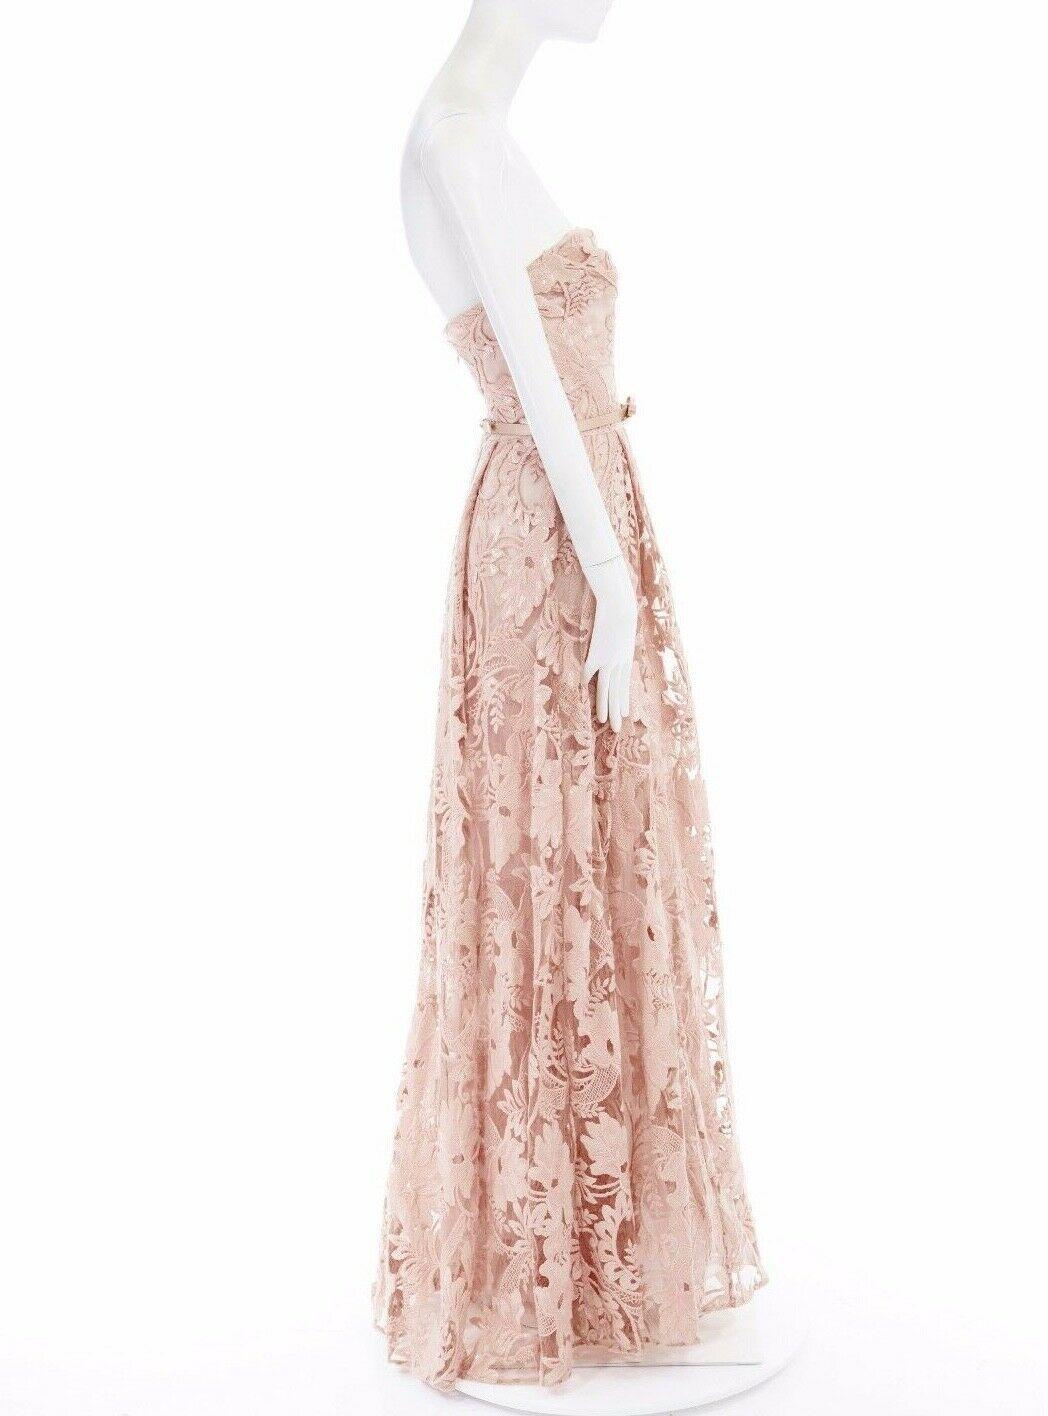 Beige new MARCHESA NOTTE nude pink sequins embroidery lace belted gown dress US6 M